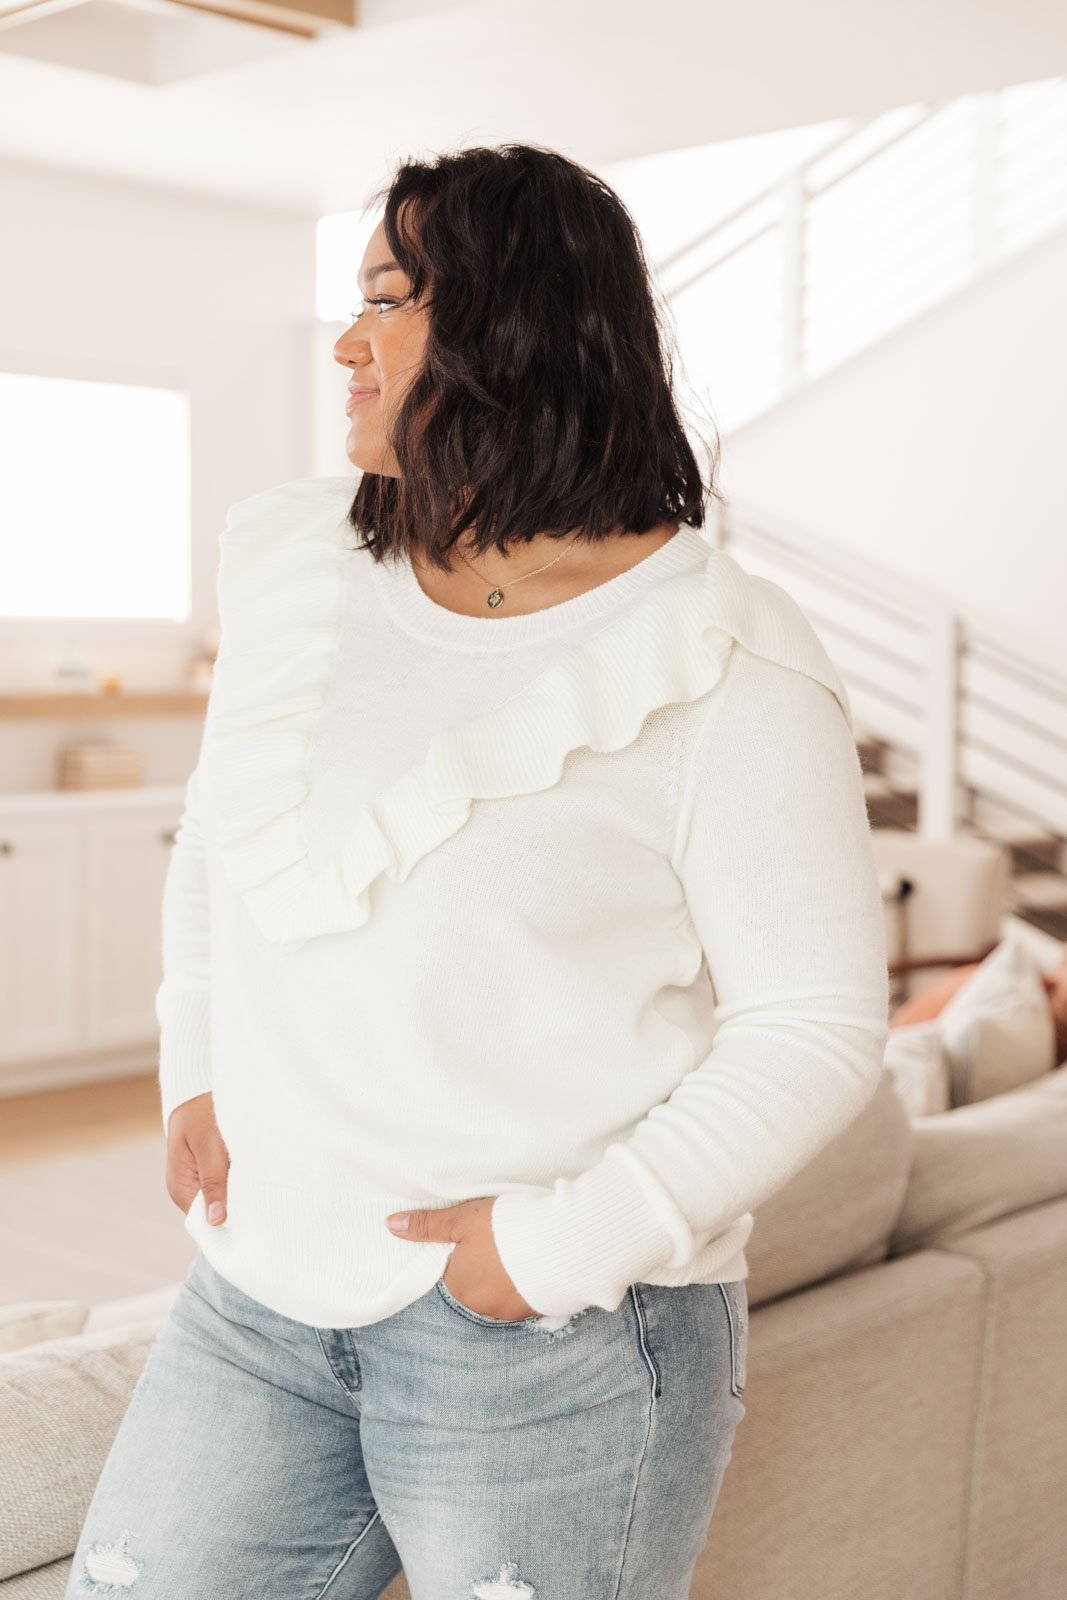 I Choose You Sweater in Ivory (Online Exclusive)